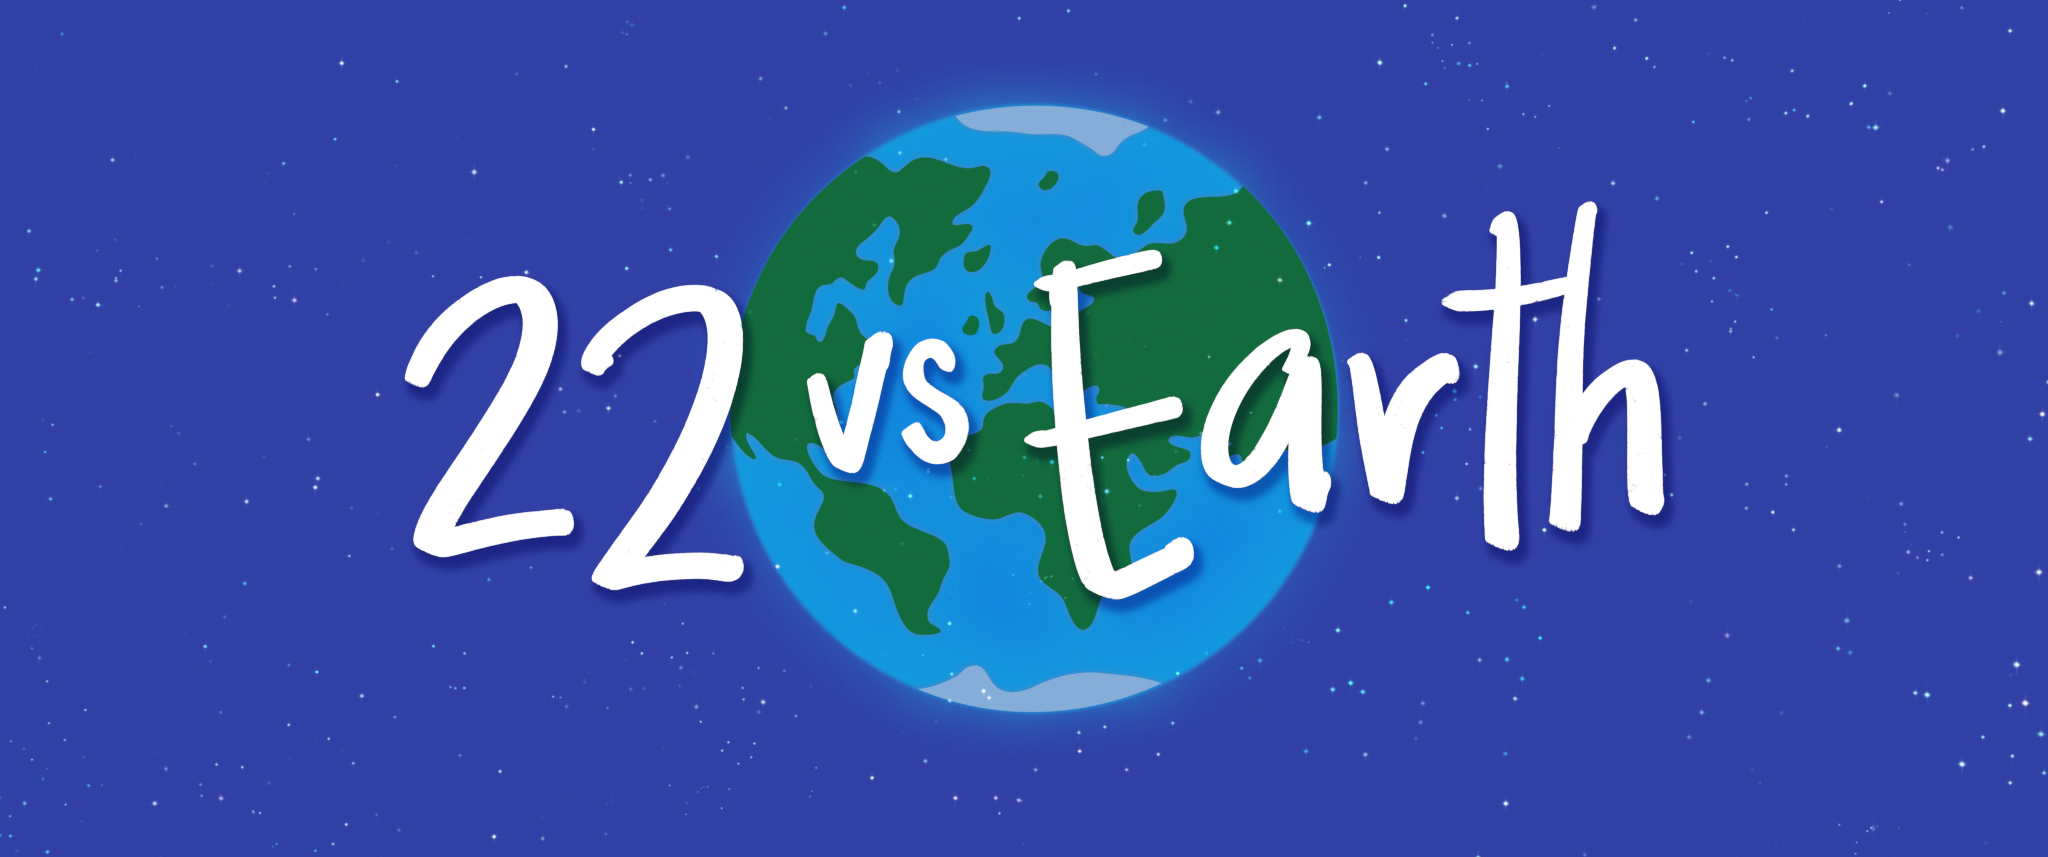 Do you love Pixar Short Films? Then 22 vs Earth is a MUST WATCH!